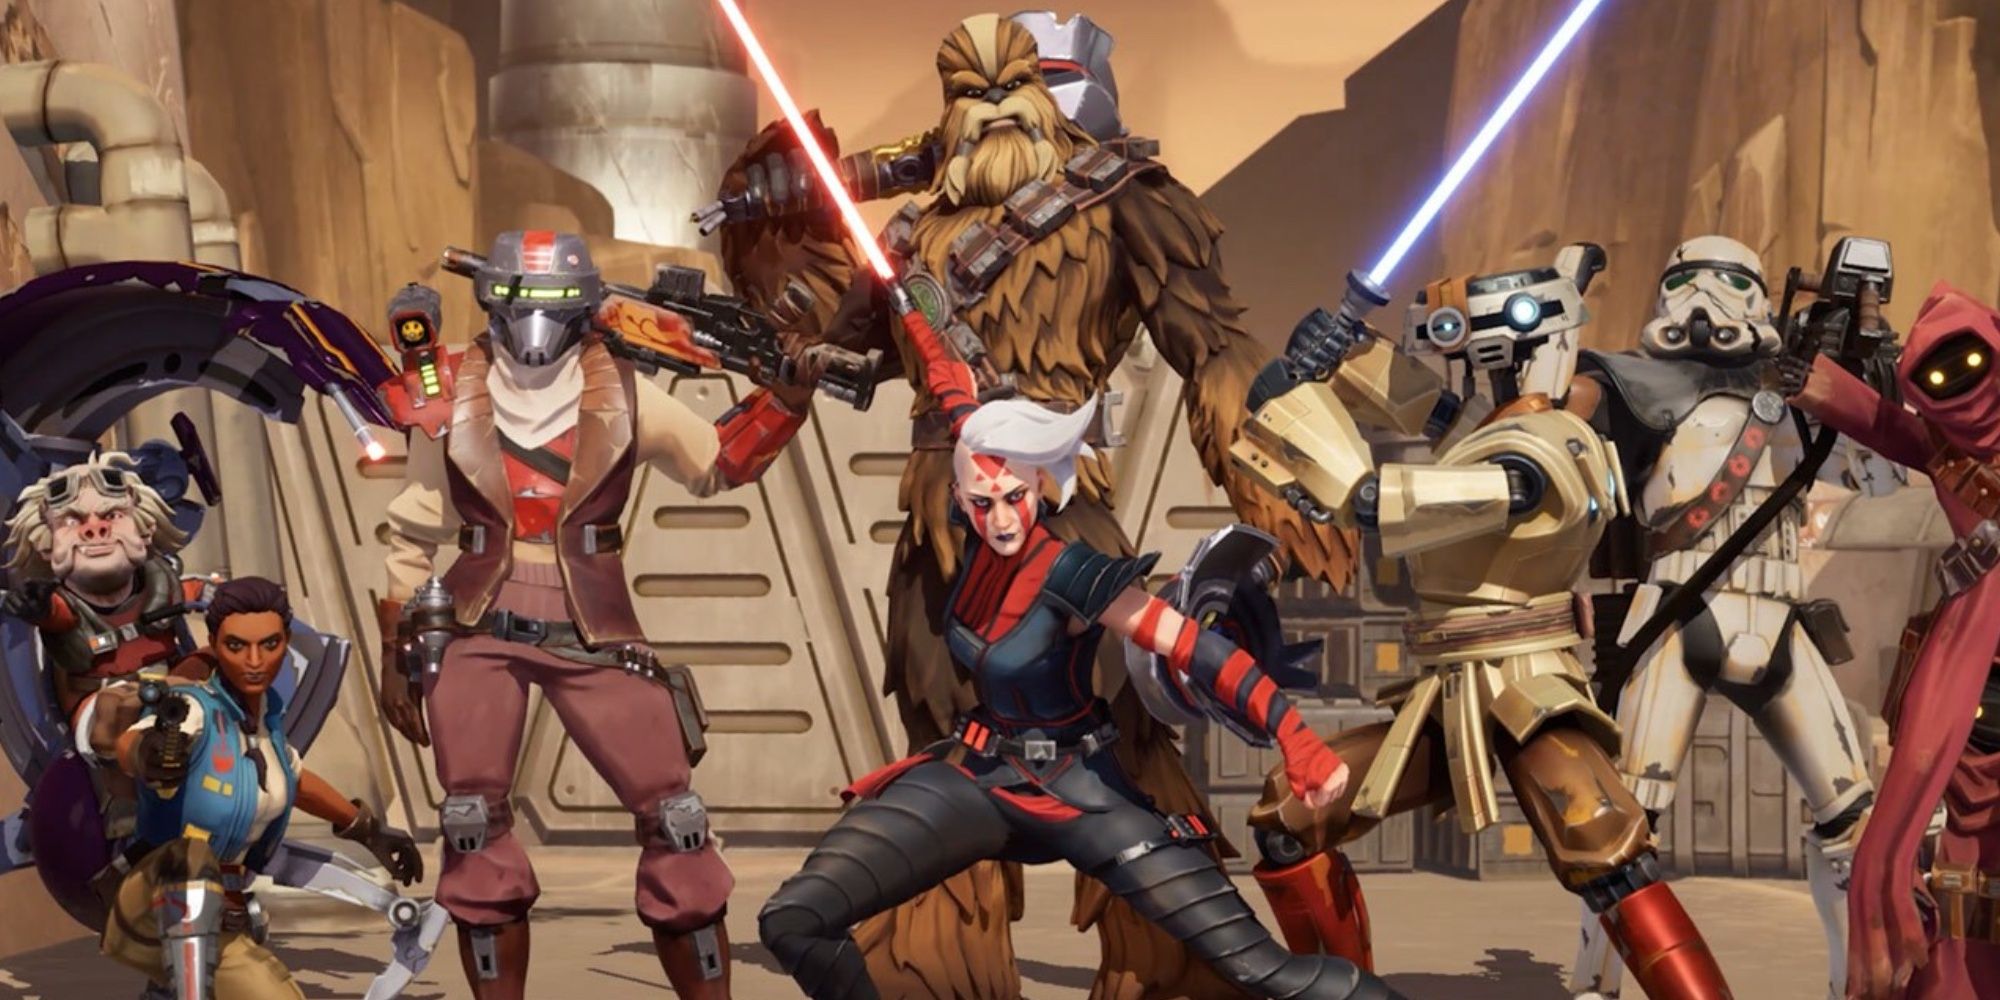 Sith, Jedi and Stormtroopers posing together in Star Wars: Hunters.